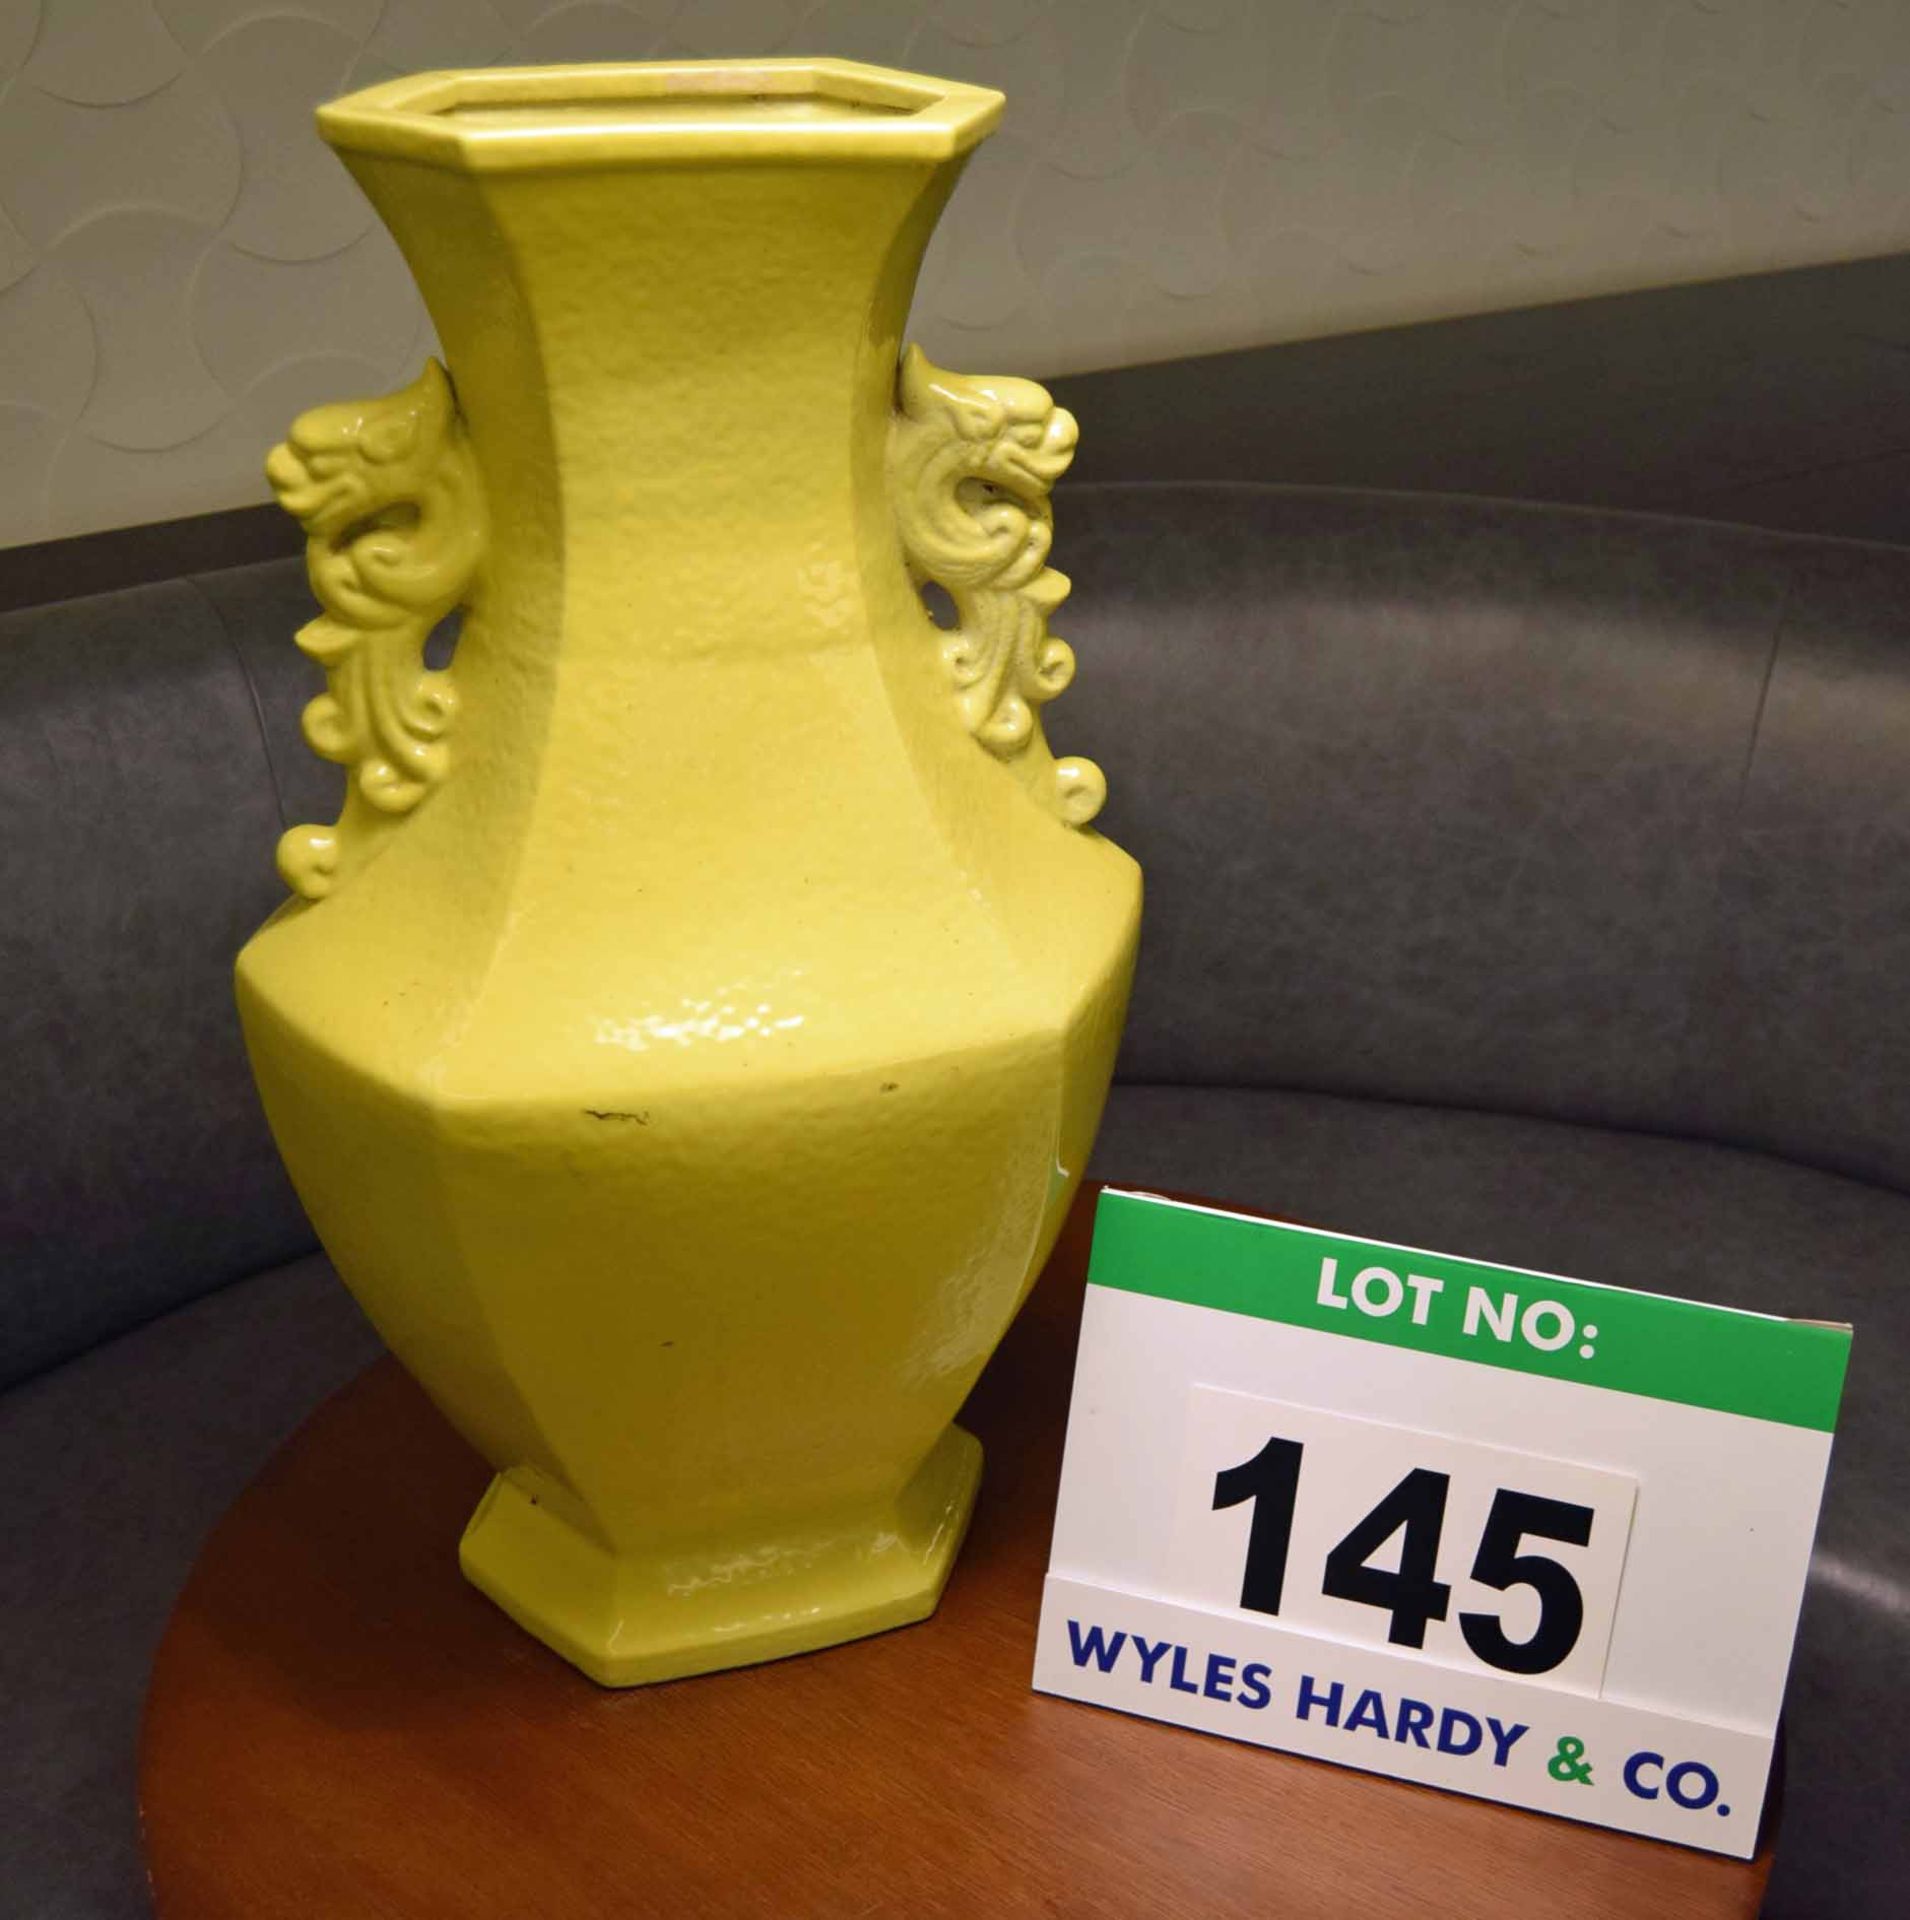 A Yellow Ceramic Vase having Moulded Dragon Head Handles, 620mm tall x 350mm at widest point